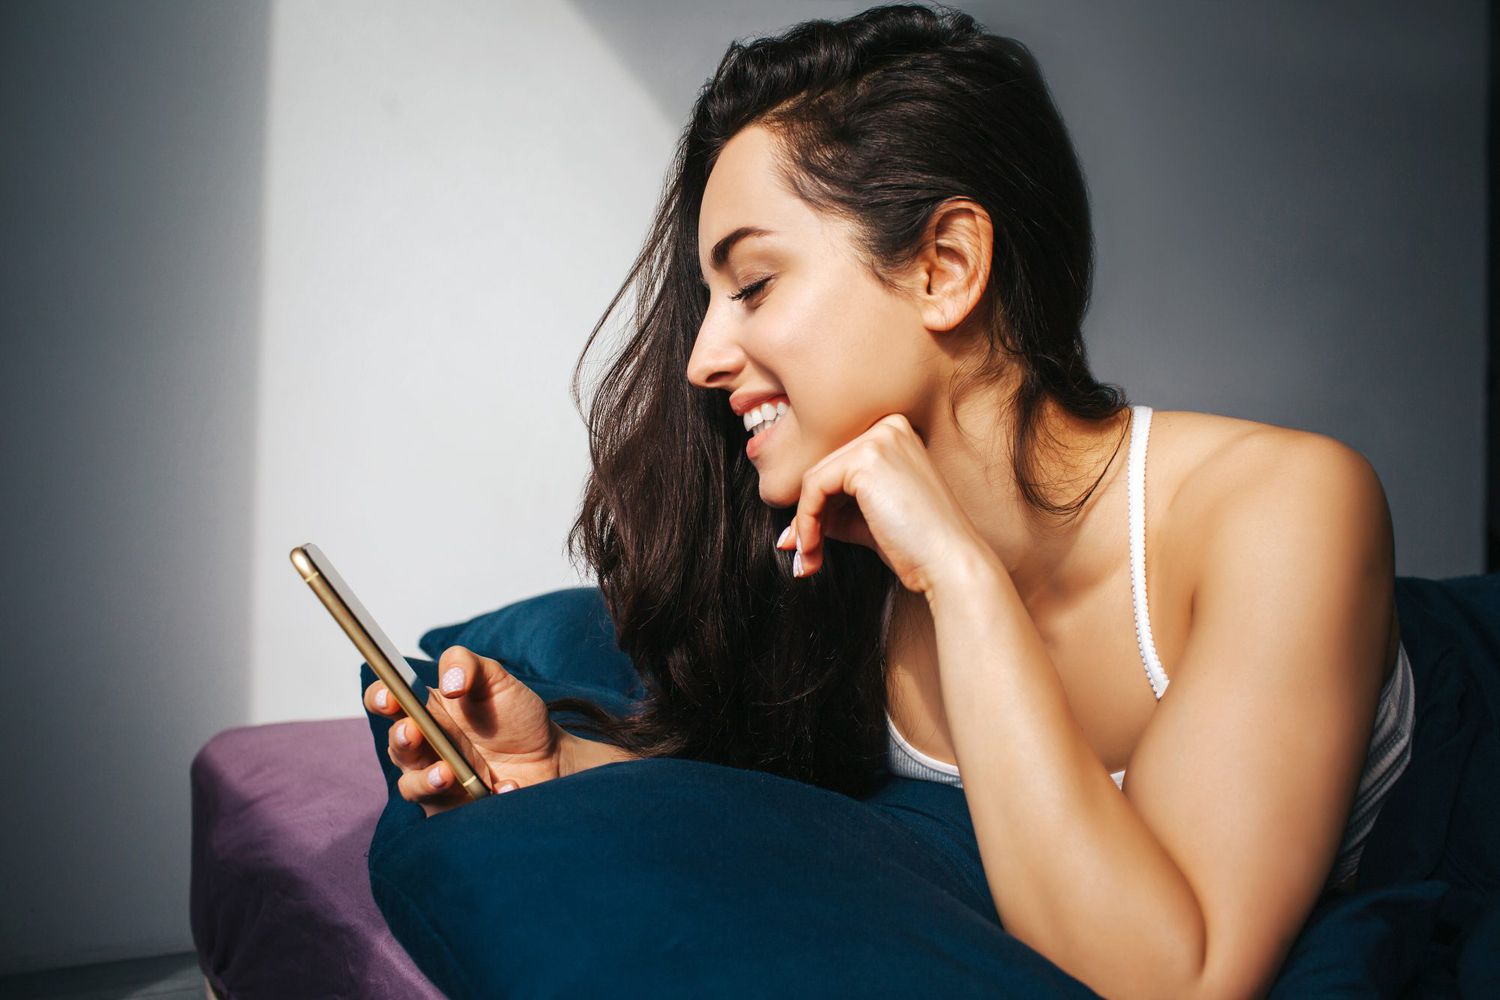 15 Tinder Conversation Starters That Are Basically Sexts